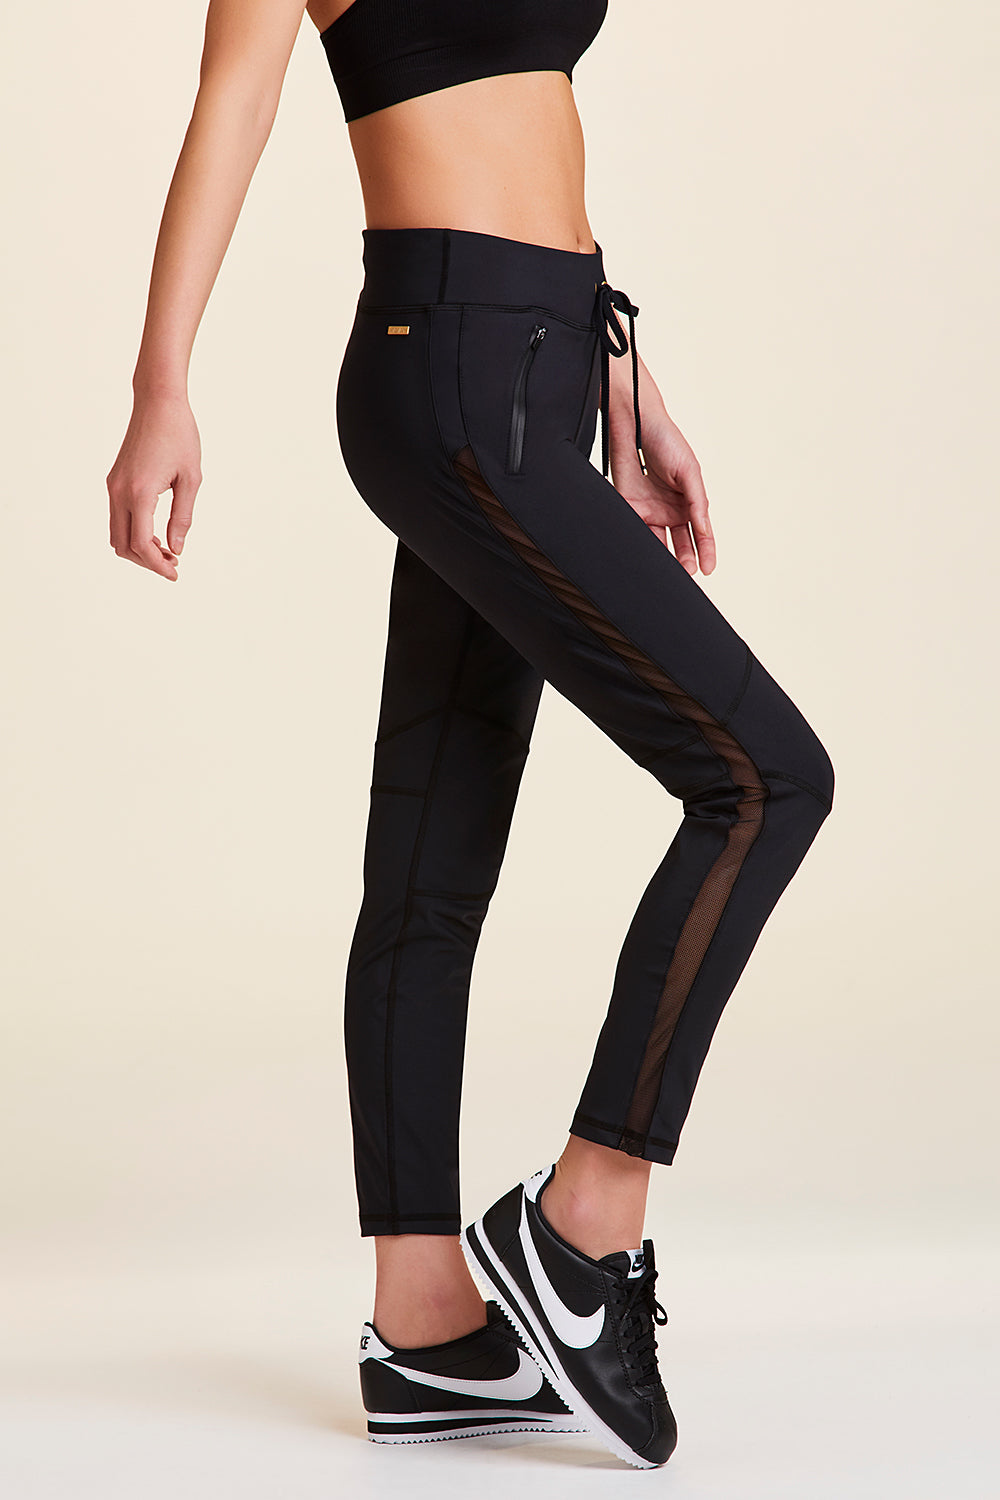 Athleisure Joggers for Active Women